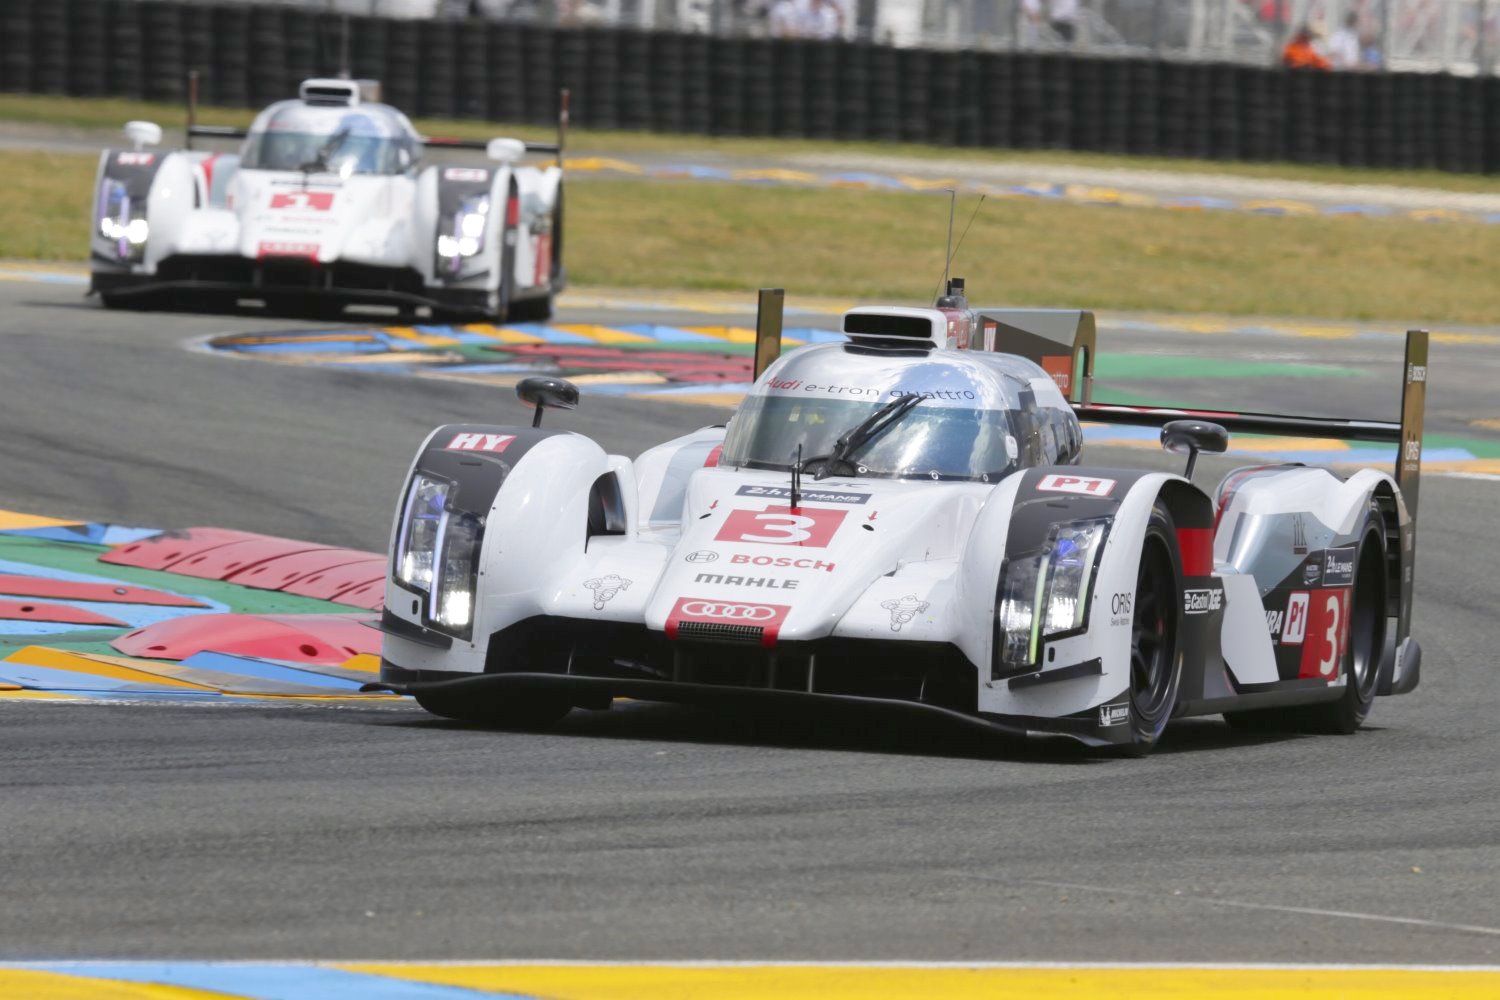 With such a strong history in sports car racing, will Audi really come to F1?